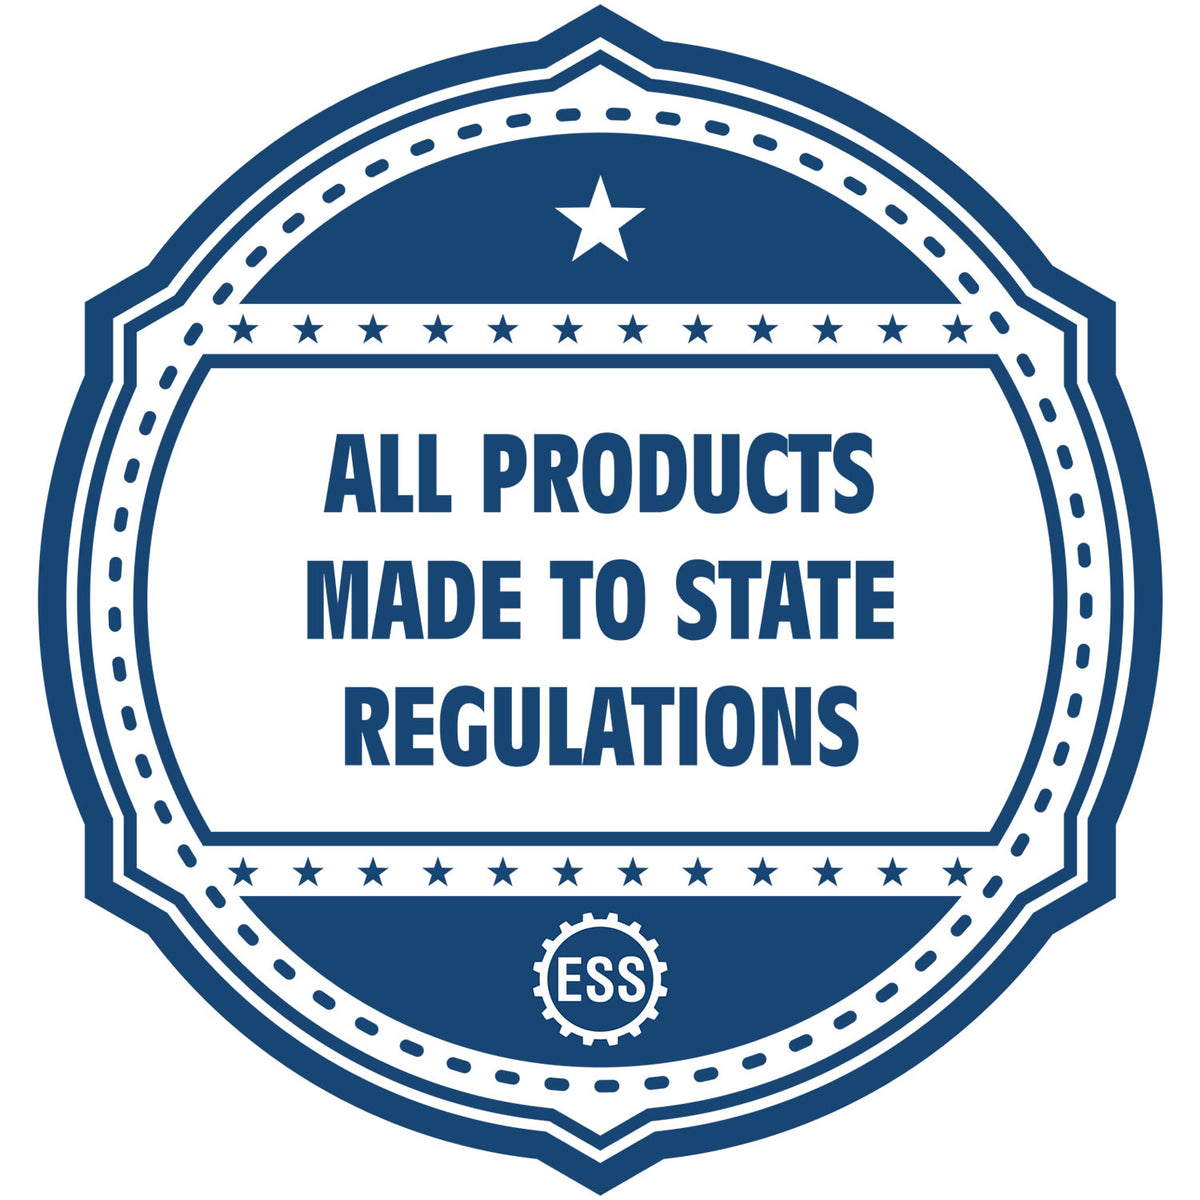 A blue icon or badge for the Gift District of Columbia Architect Seal showing that this product is made in compliance with state regulations.